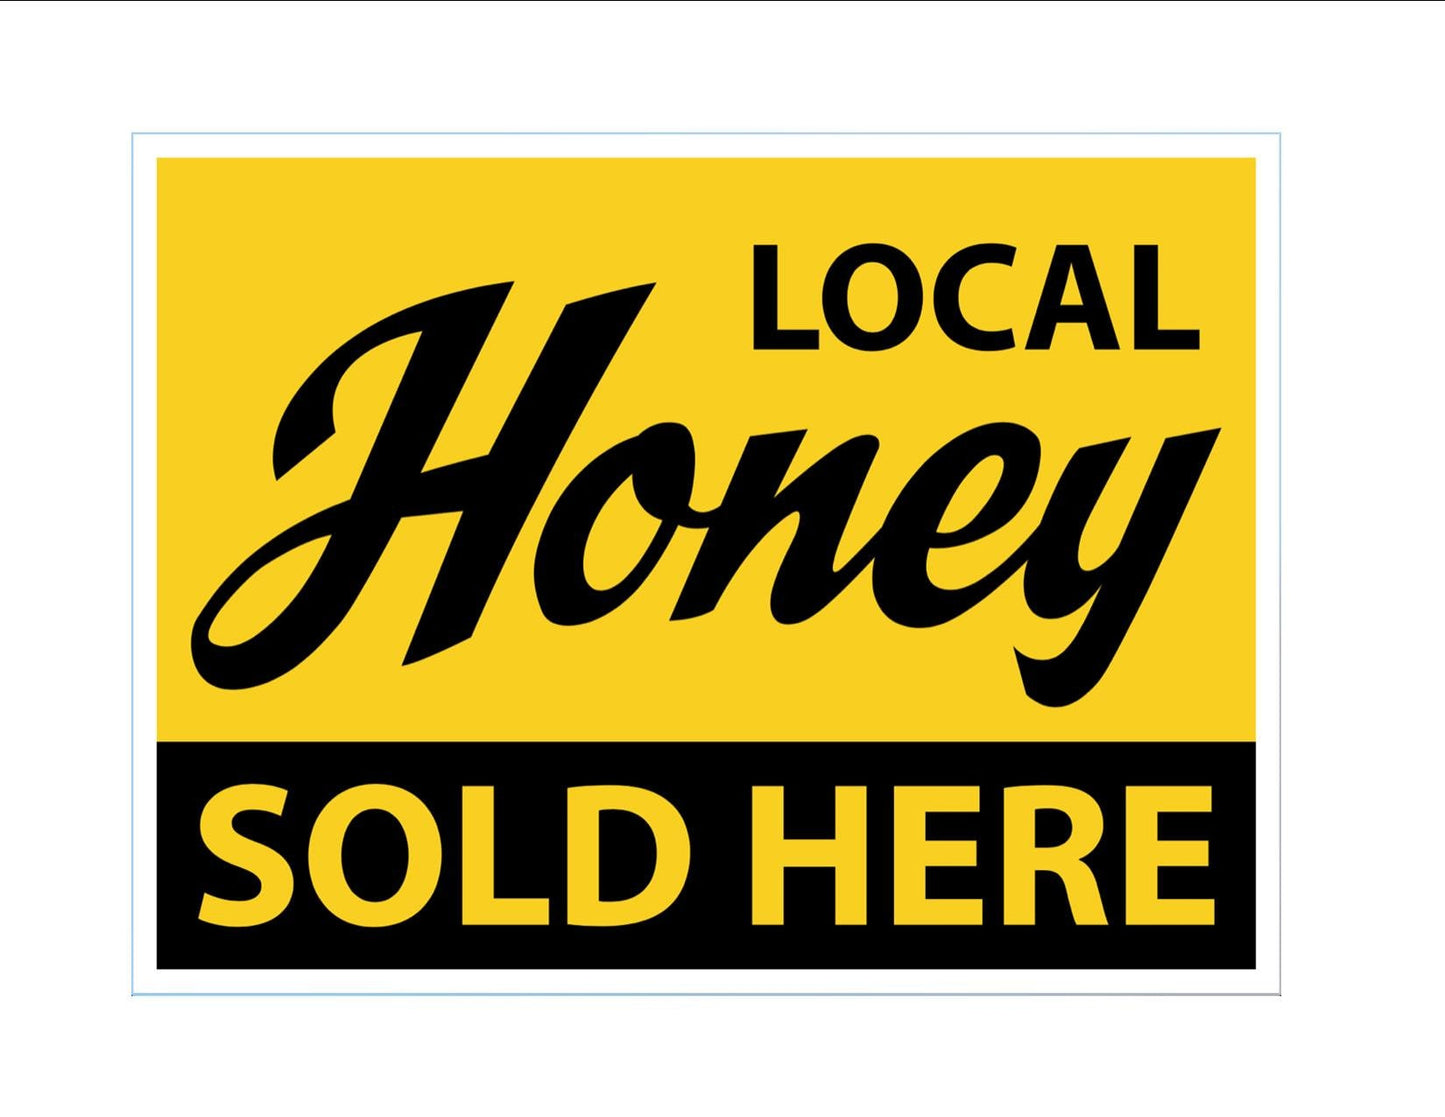 Local Honey Sold Here Yard Sign - 18X24" with Stake - Fast Free Shipping!